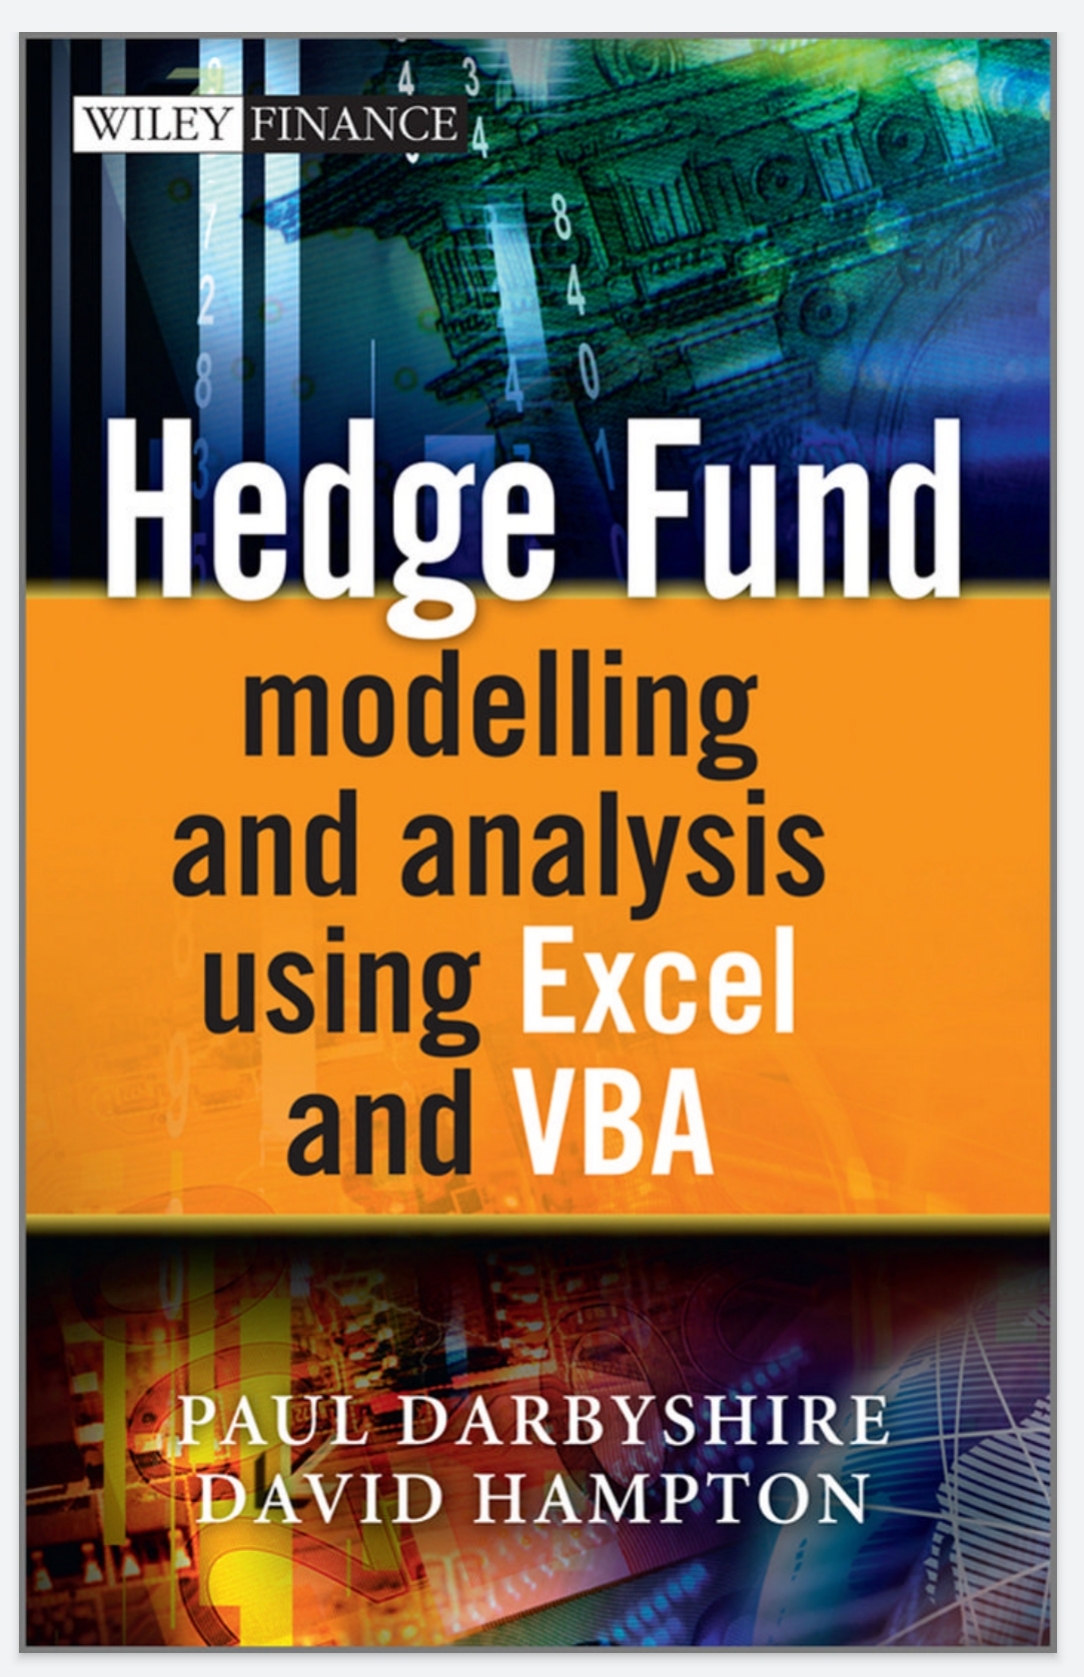 hedge-fund-modeling-and-analysis-using-excel-and-vba-ebooks-pdf